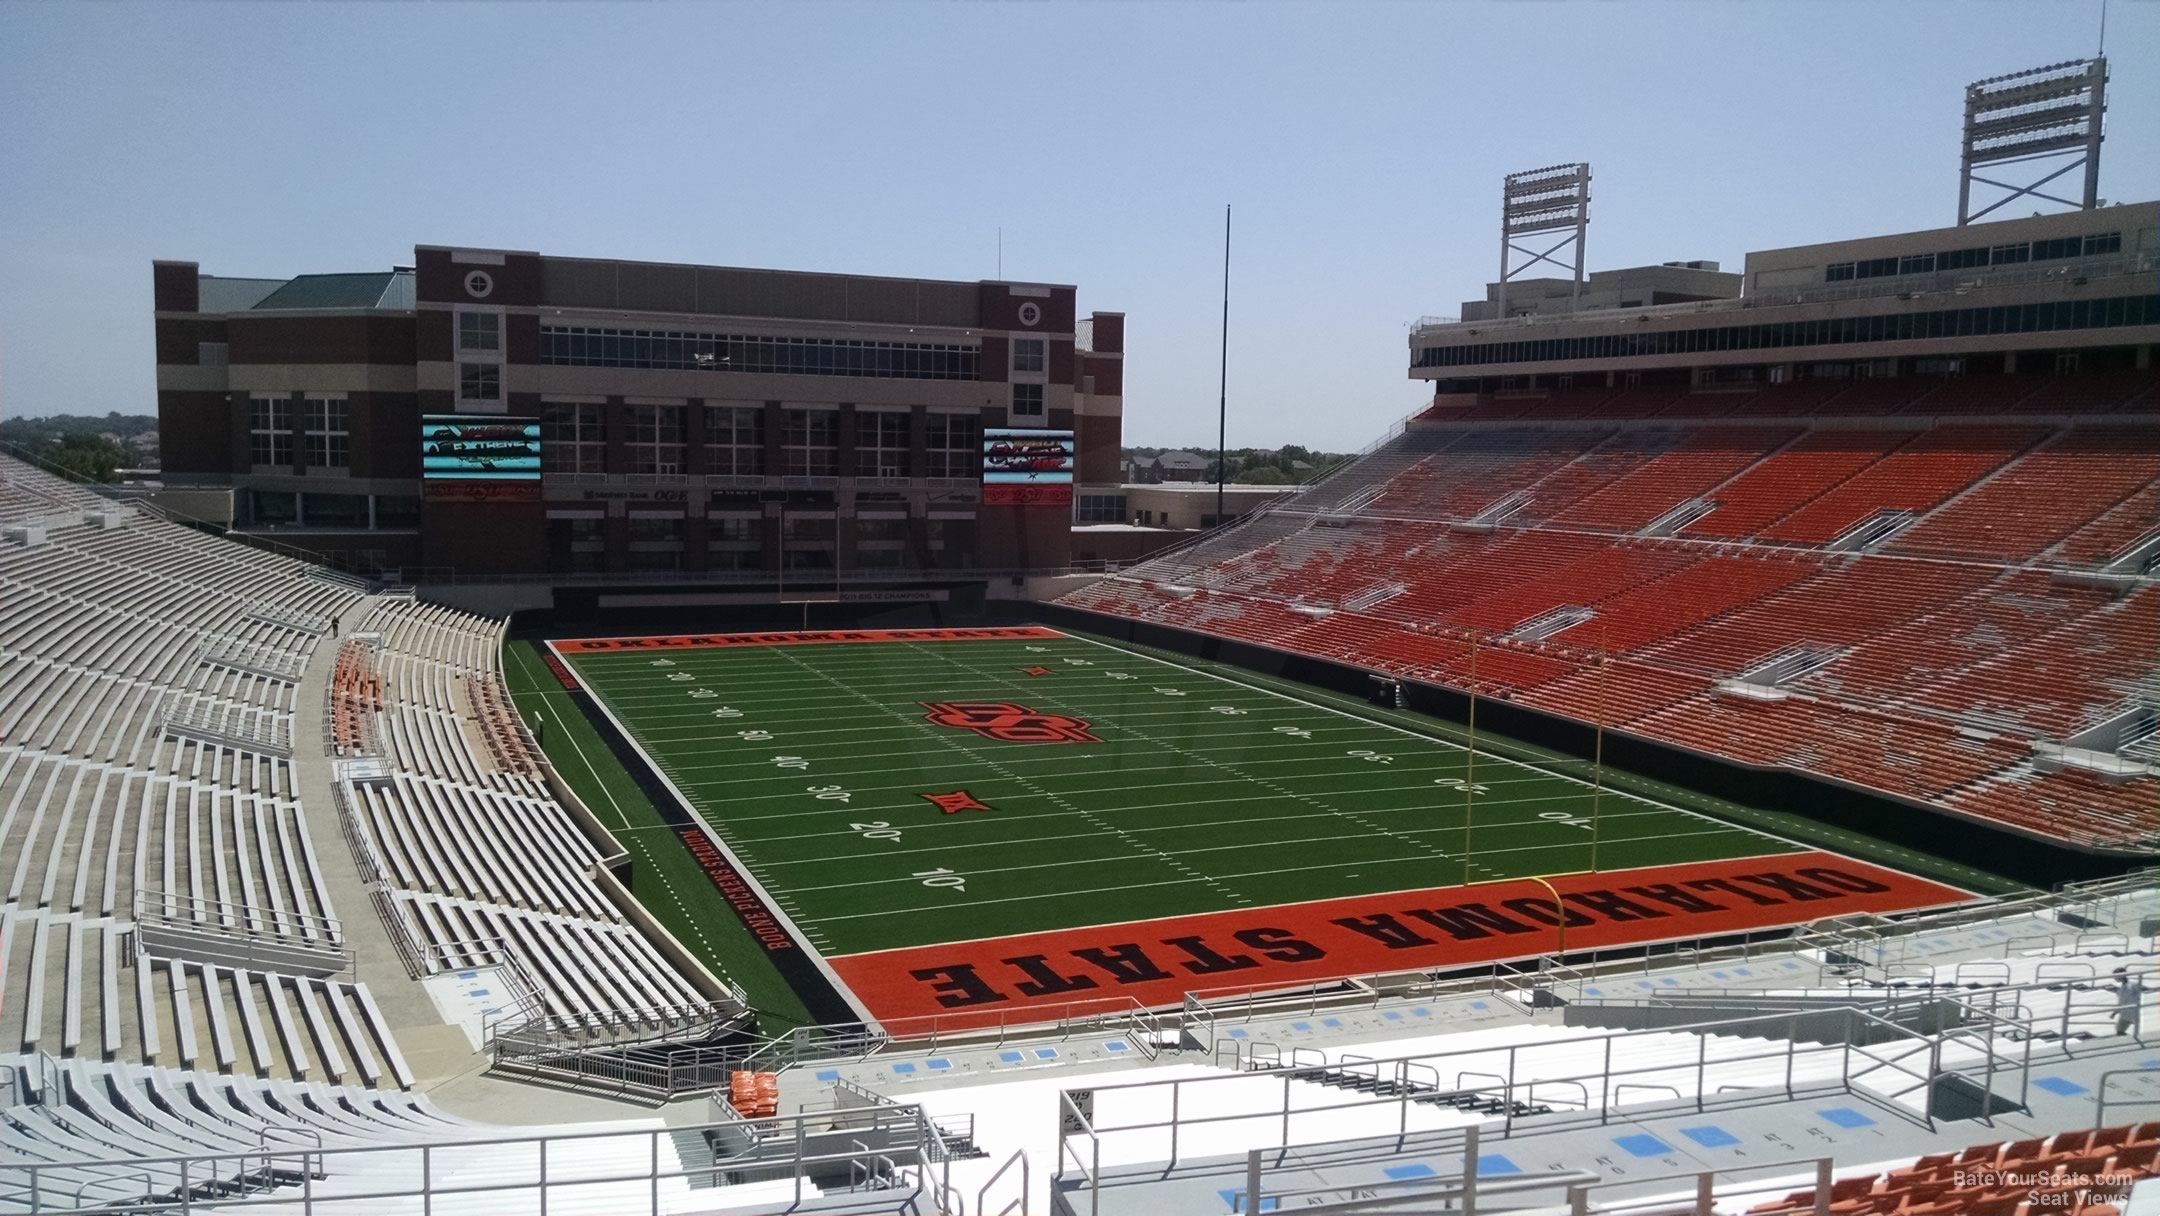 section 323, row 19 seat view  - boone pickens stadium